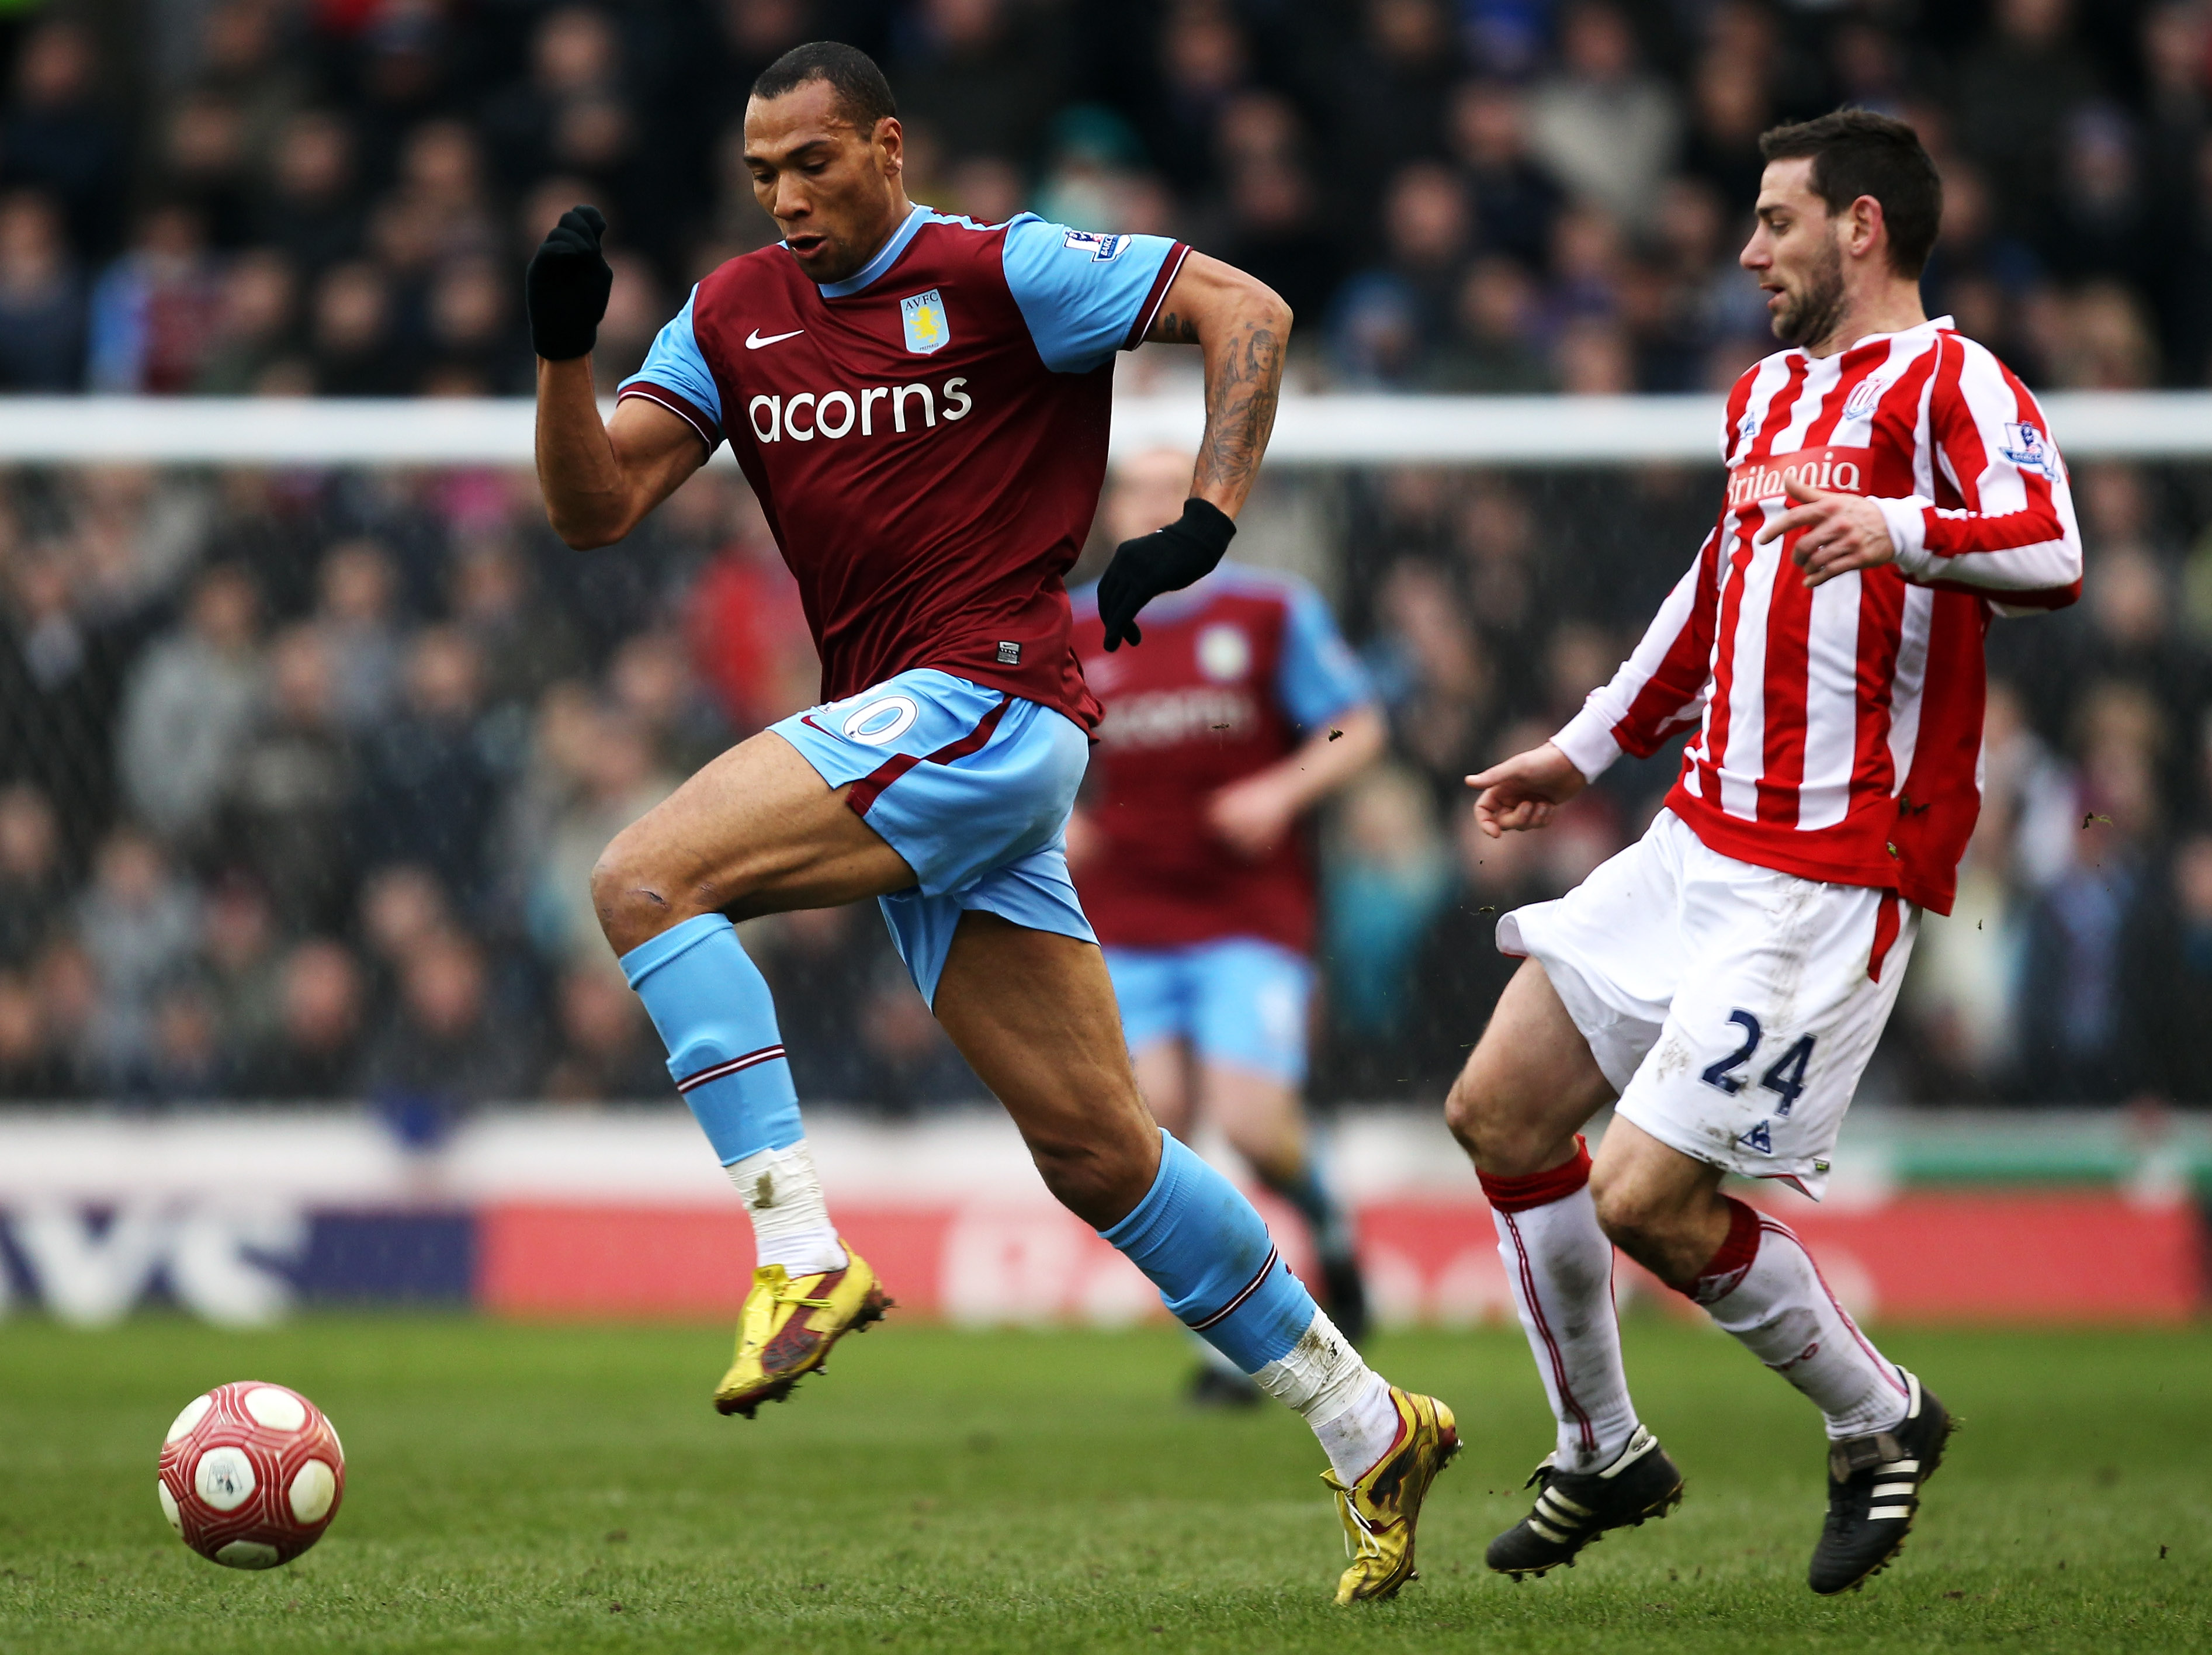 STOKE ON TRENT, ENGLAND - MARCH 13:  John Carew of Aston Villa avoids Rory Delap of Stoke City during the Barclays Premier League match between Stoke City and Aston Villa at Britannia Stadium on March 13th, 2010 in Stoke on Trent, England.  (Photo by Bryn